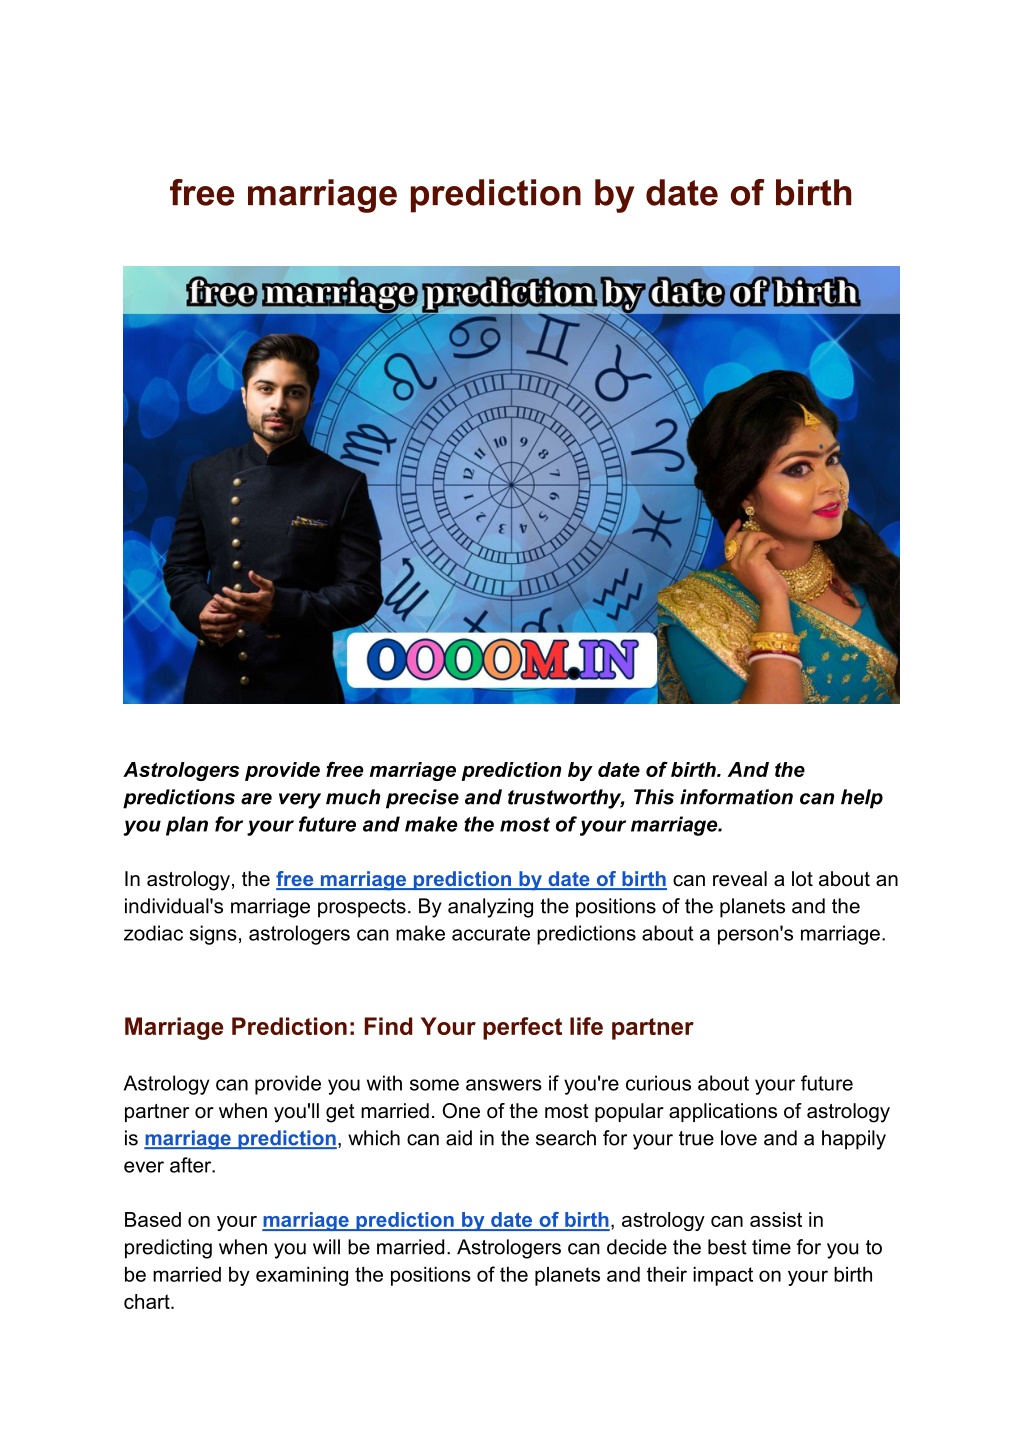 PPT free marriage prediction by date of birth PowerPoint Presentation